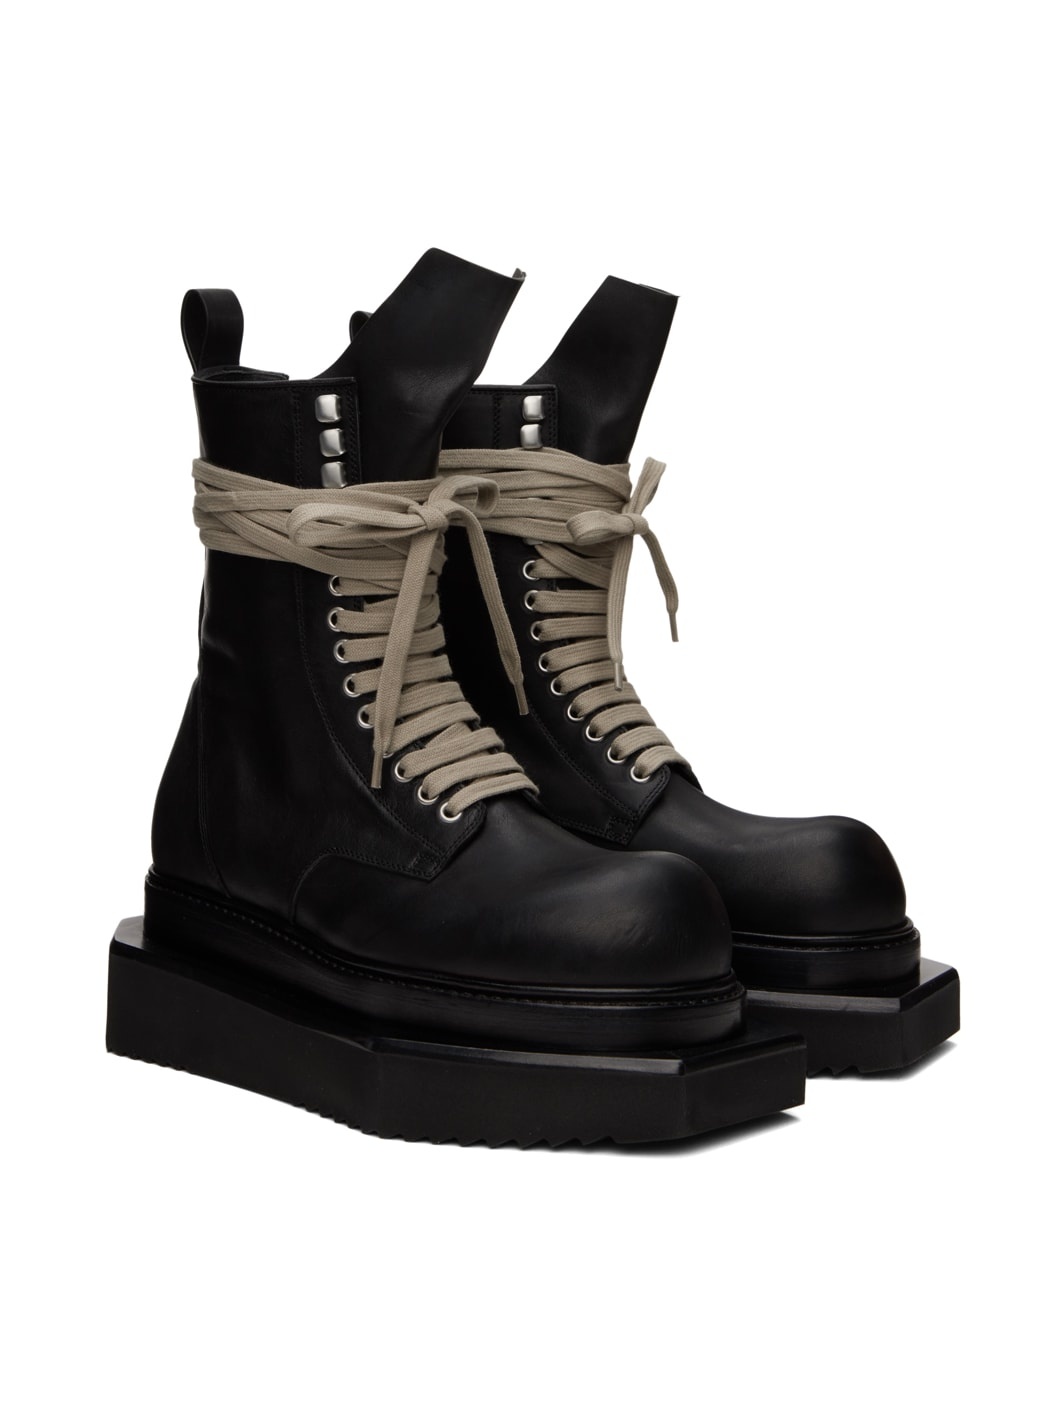 Black Laceup Turbo Cyclops Boots - 4